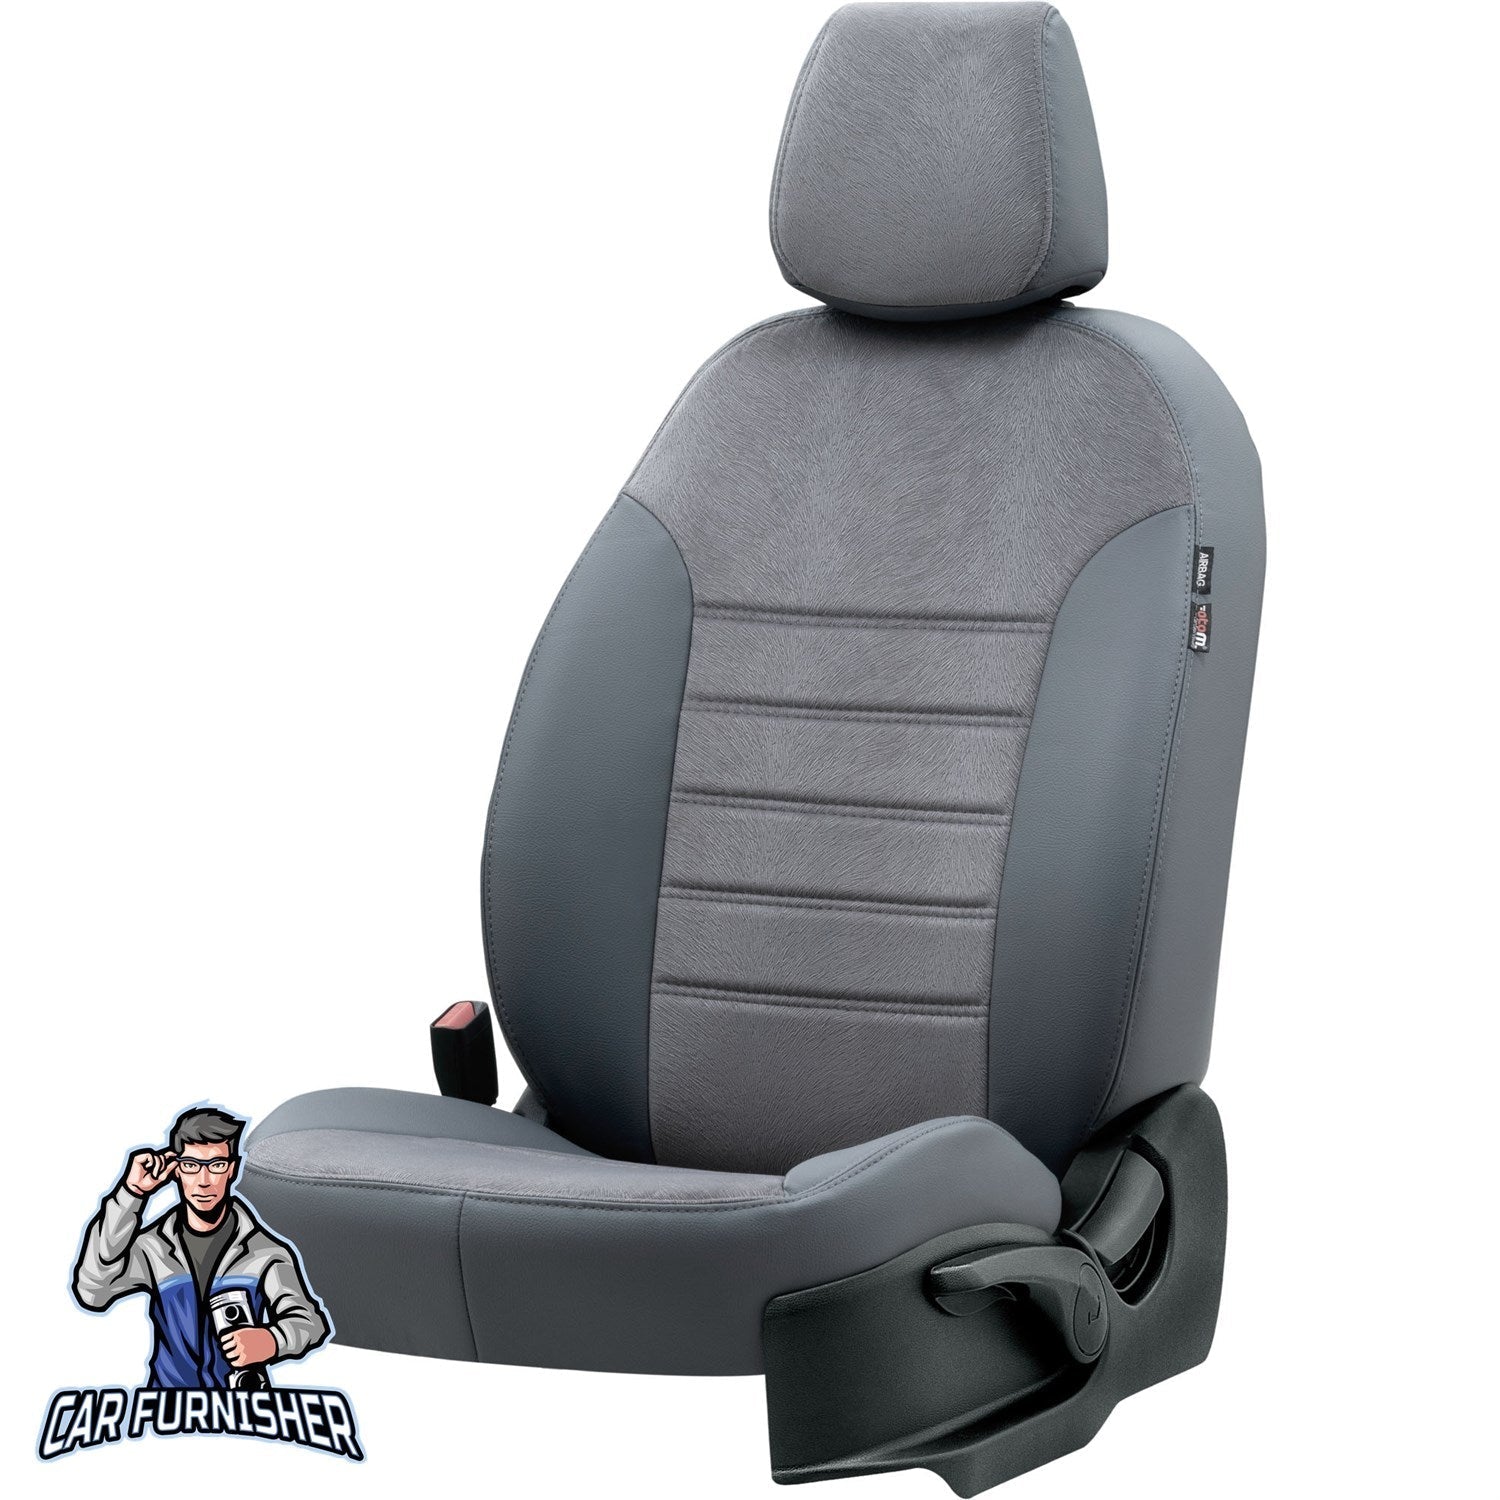 Chevrolet Tahoe Car Seat Covers 2007-2014 GMT/LS/LTZ London Smoked Full Set (5 Seats + Handrest) Leather & Fabric